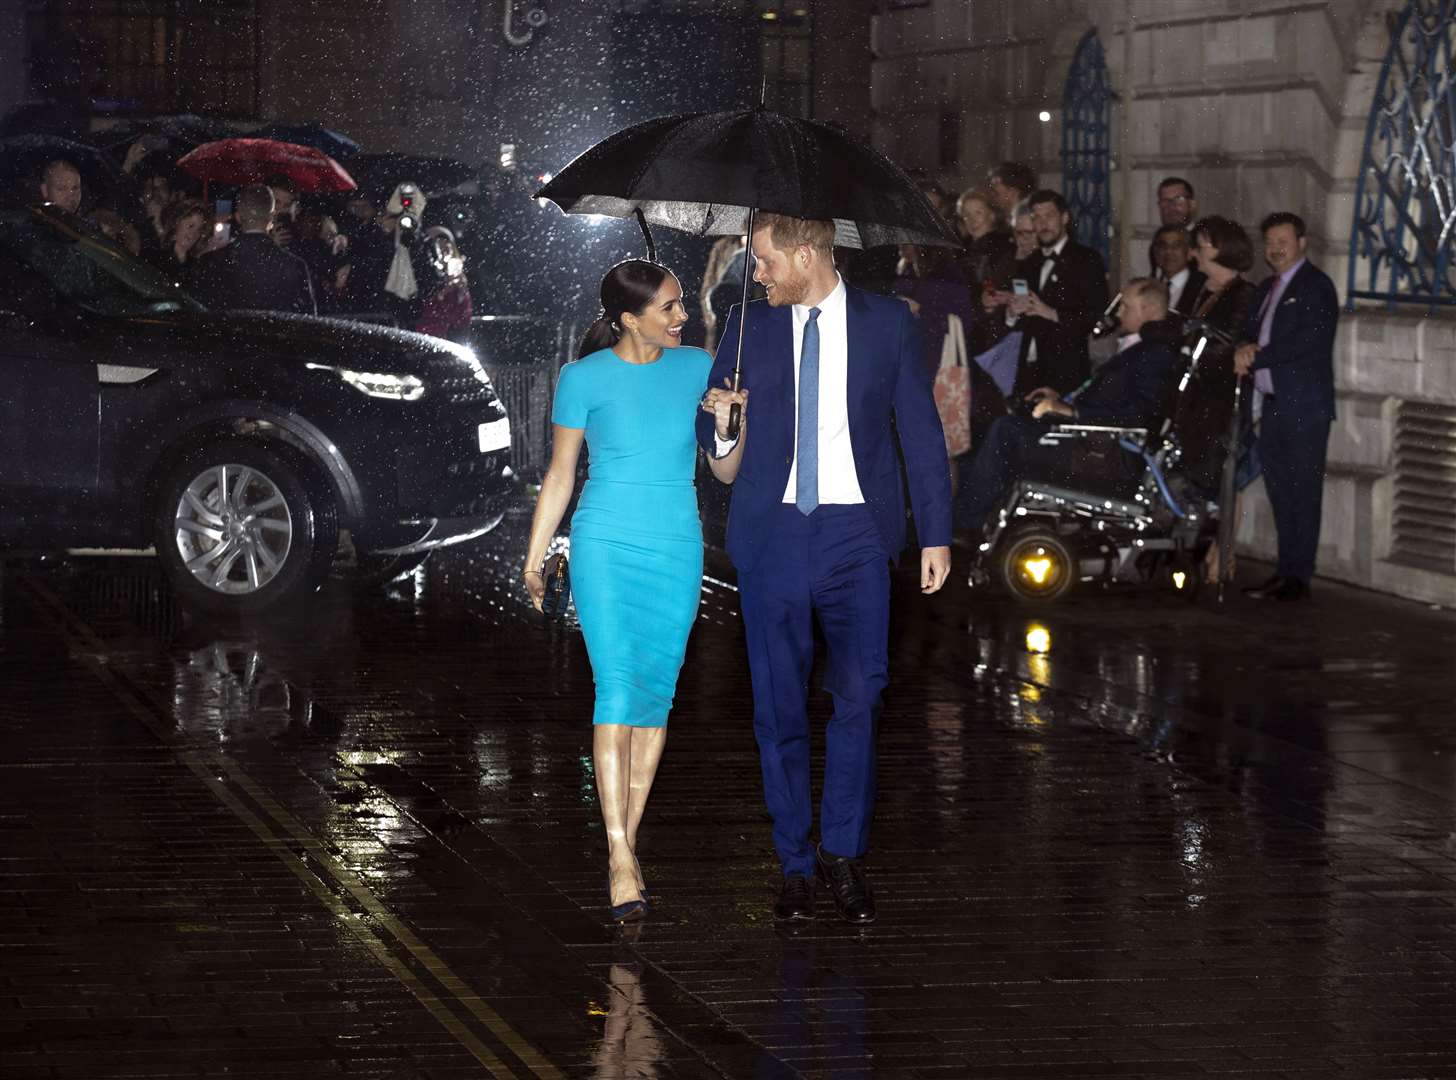 The Duke and Duchess of Sussex arrive at Mansion House in London to attend the Endeavour Fund Awards (Steve Parsons/PA)